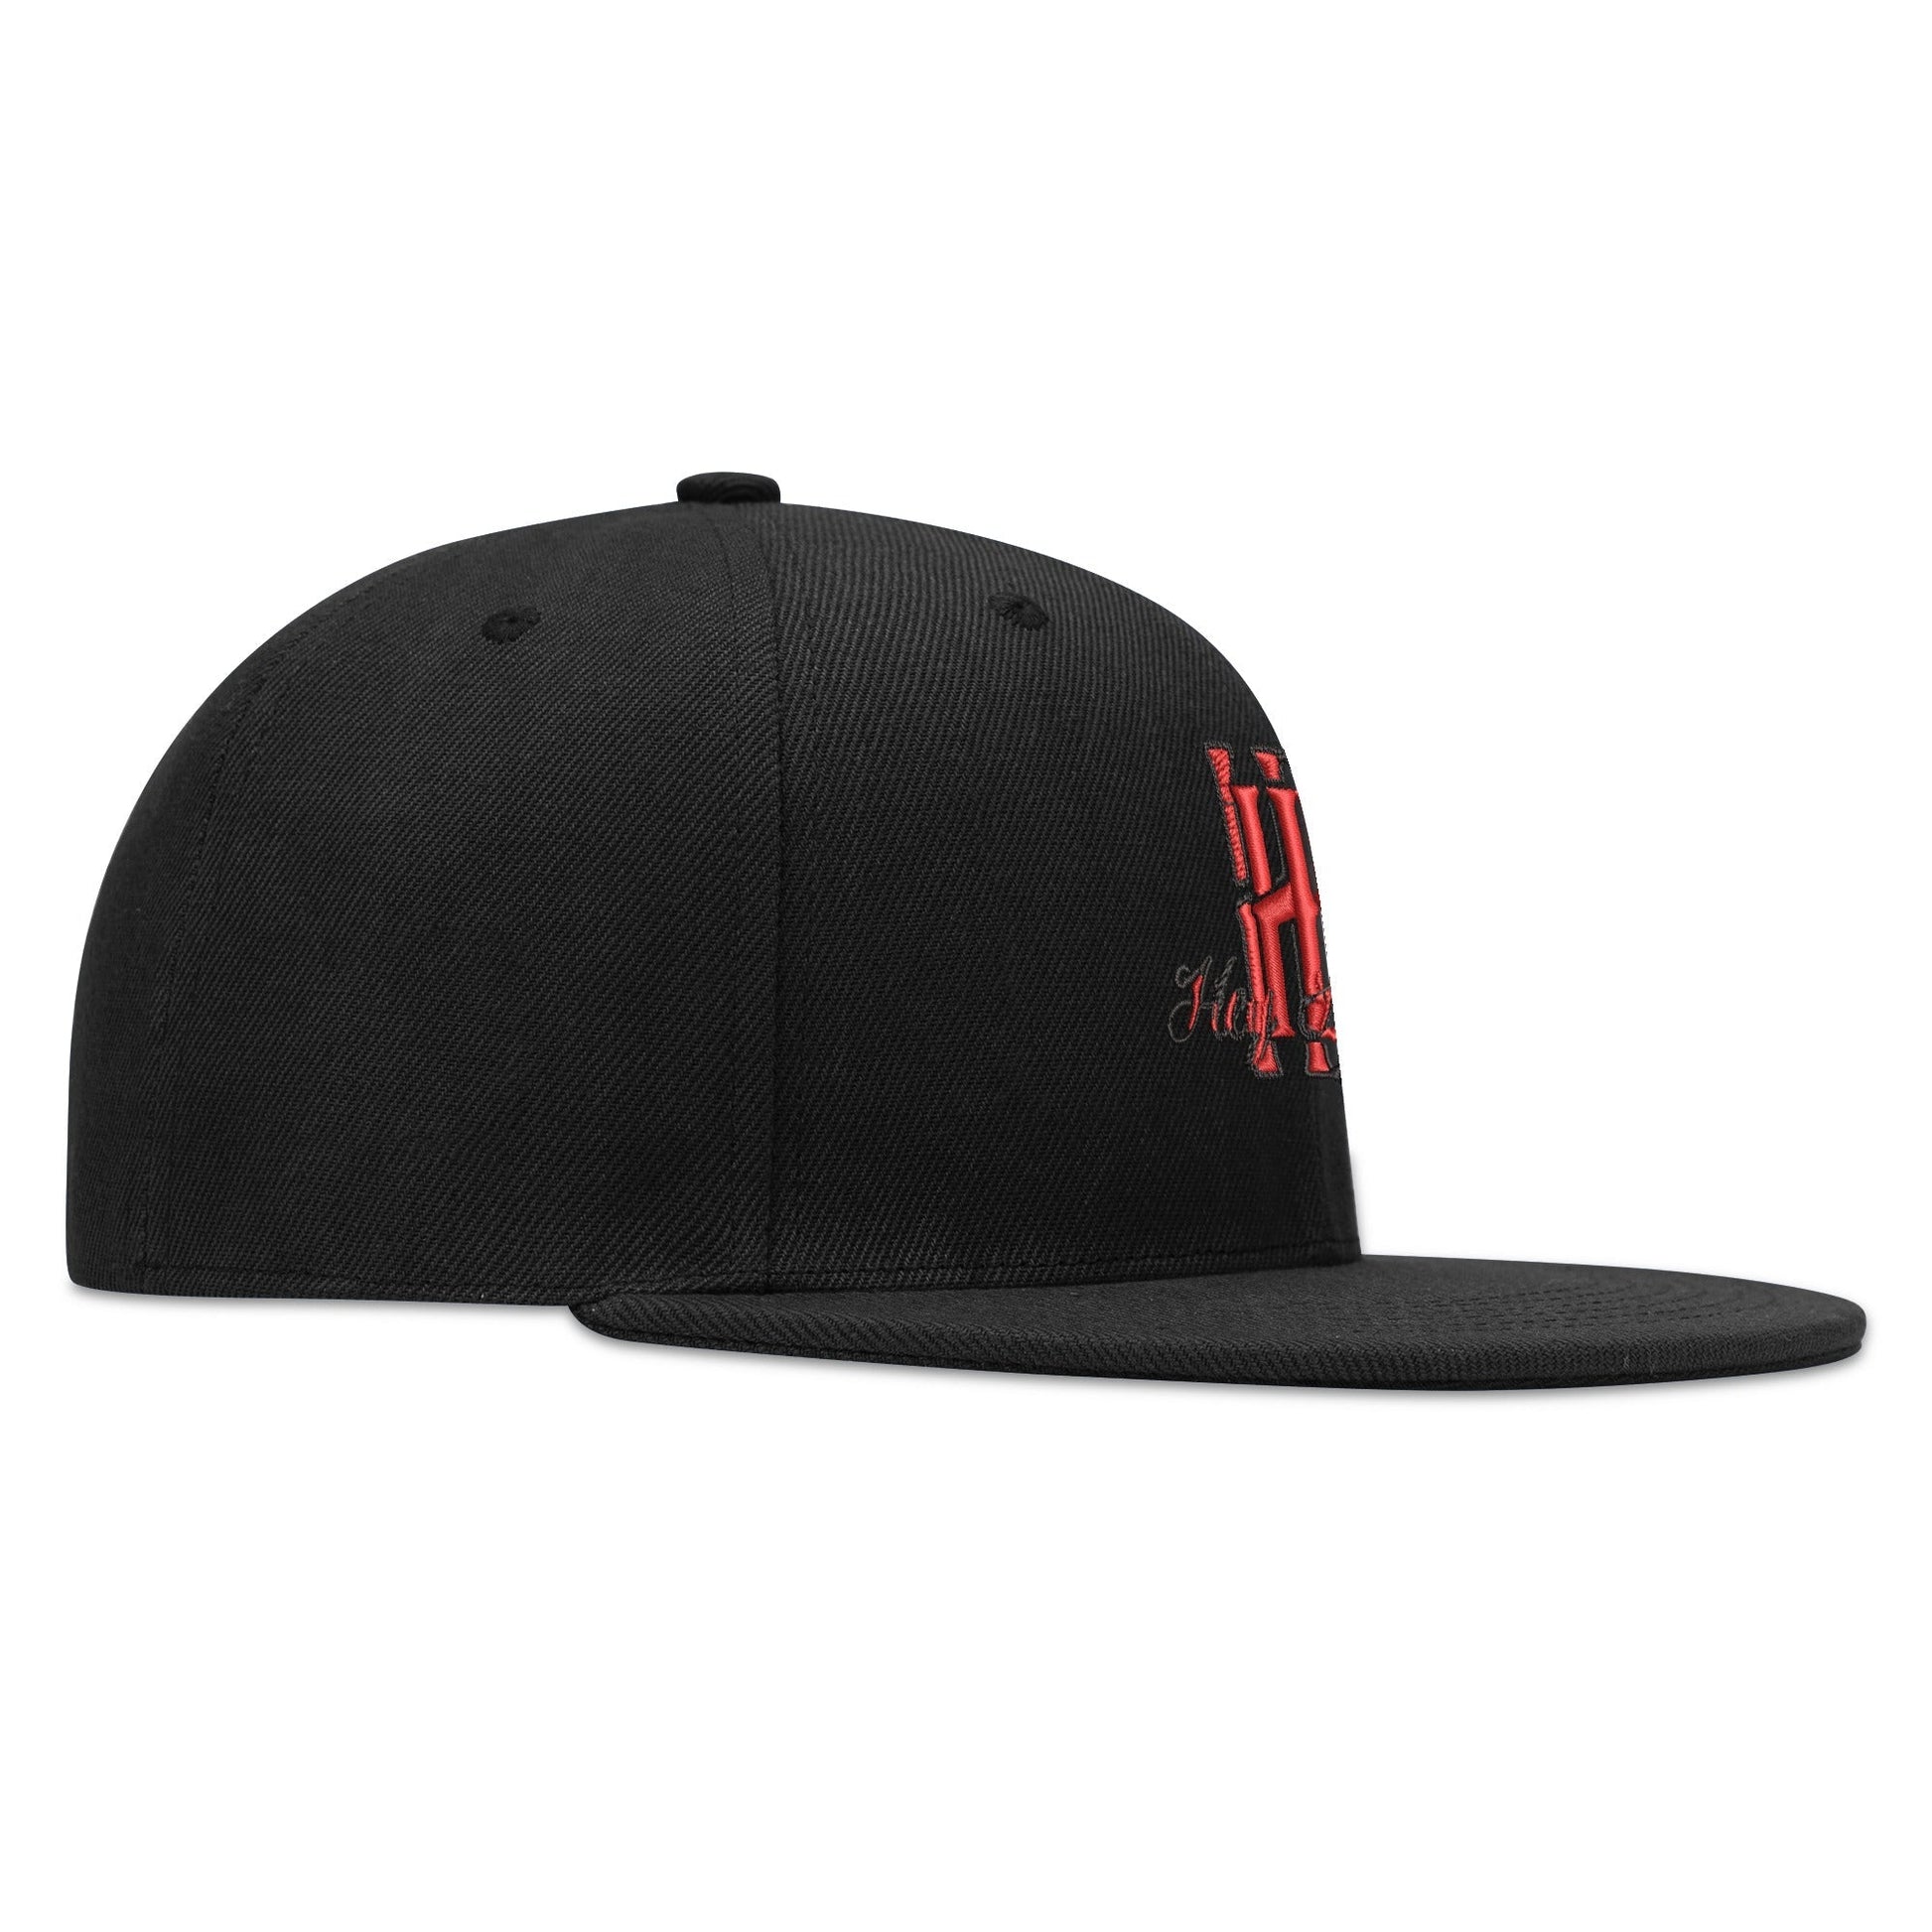 Stand out  with the  HN Embroidered Hip-hop Hats  available at Hey Nugget. Grab yours today!